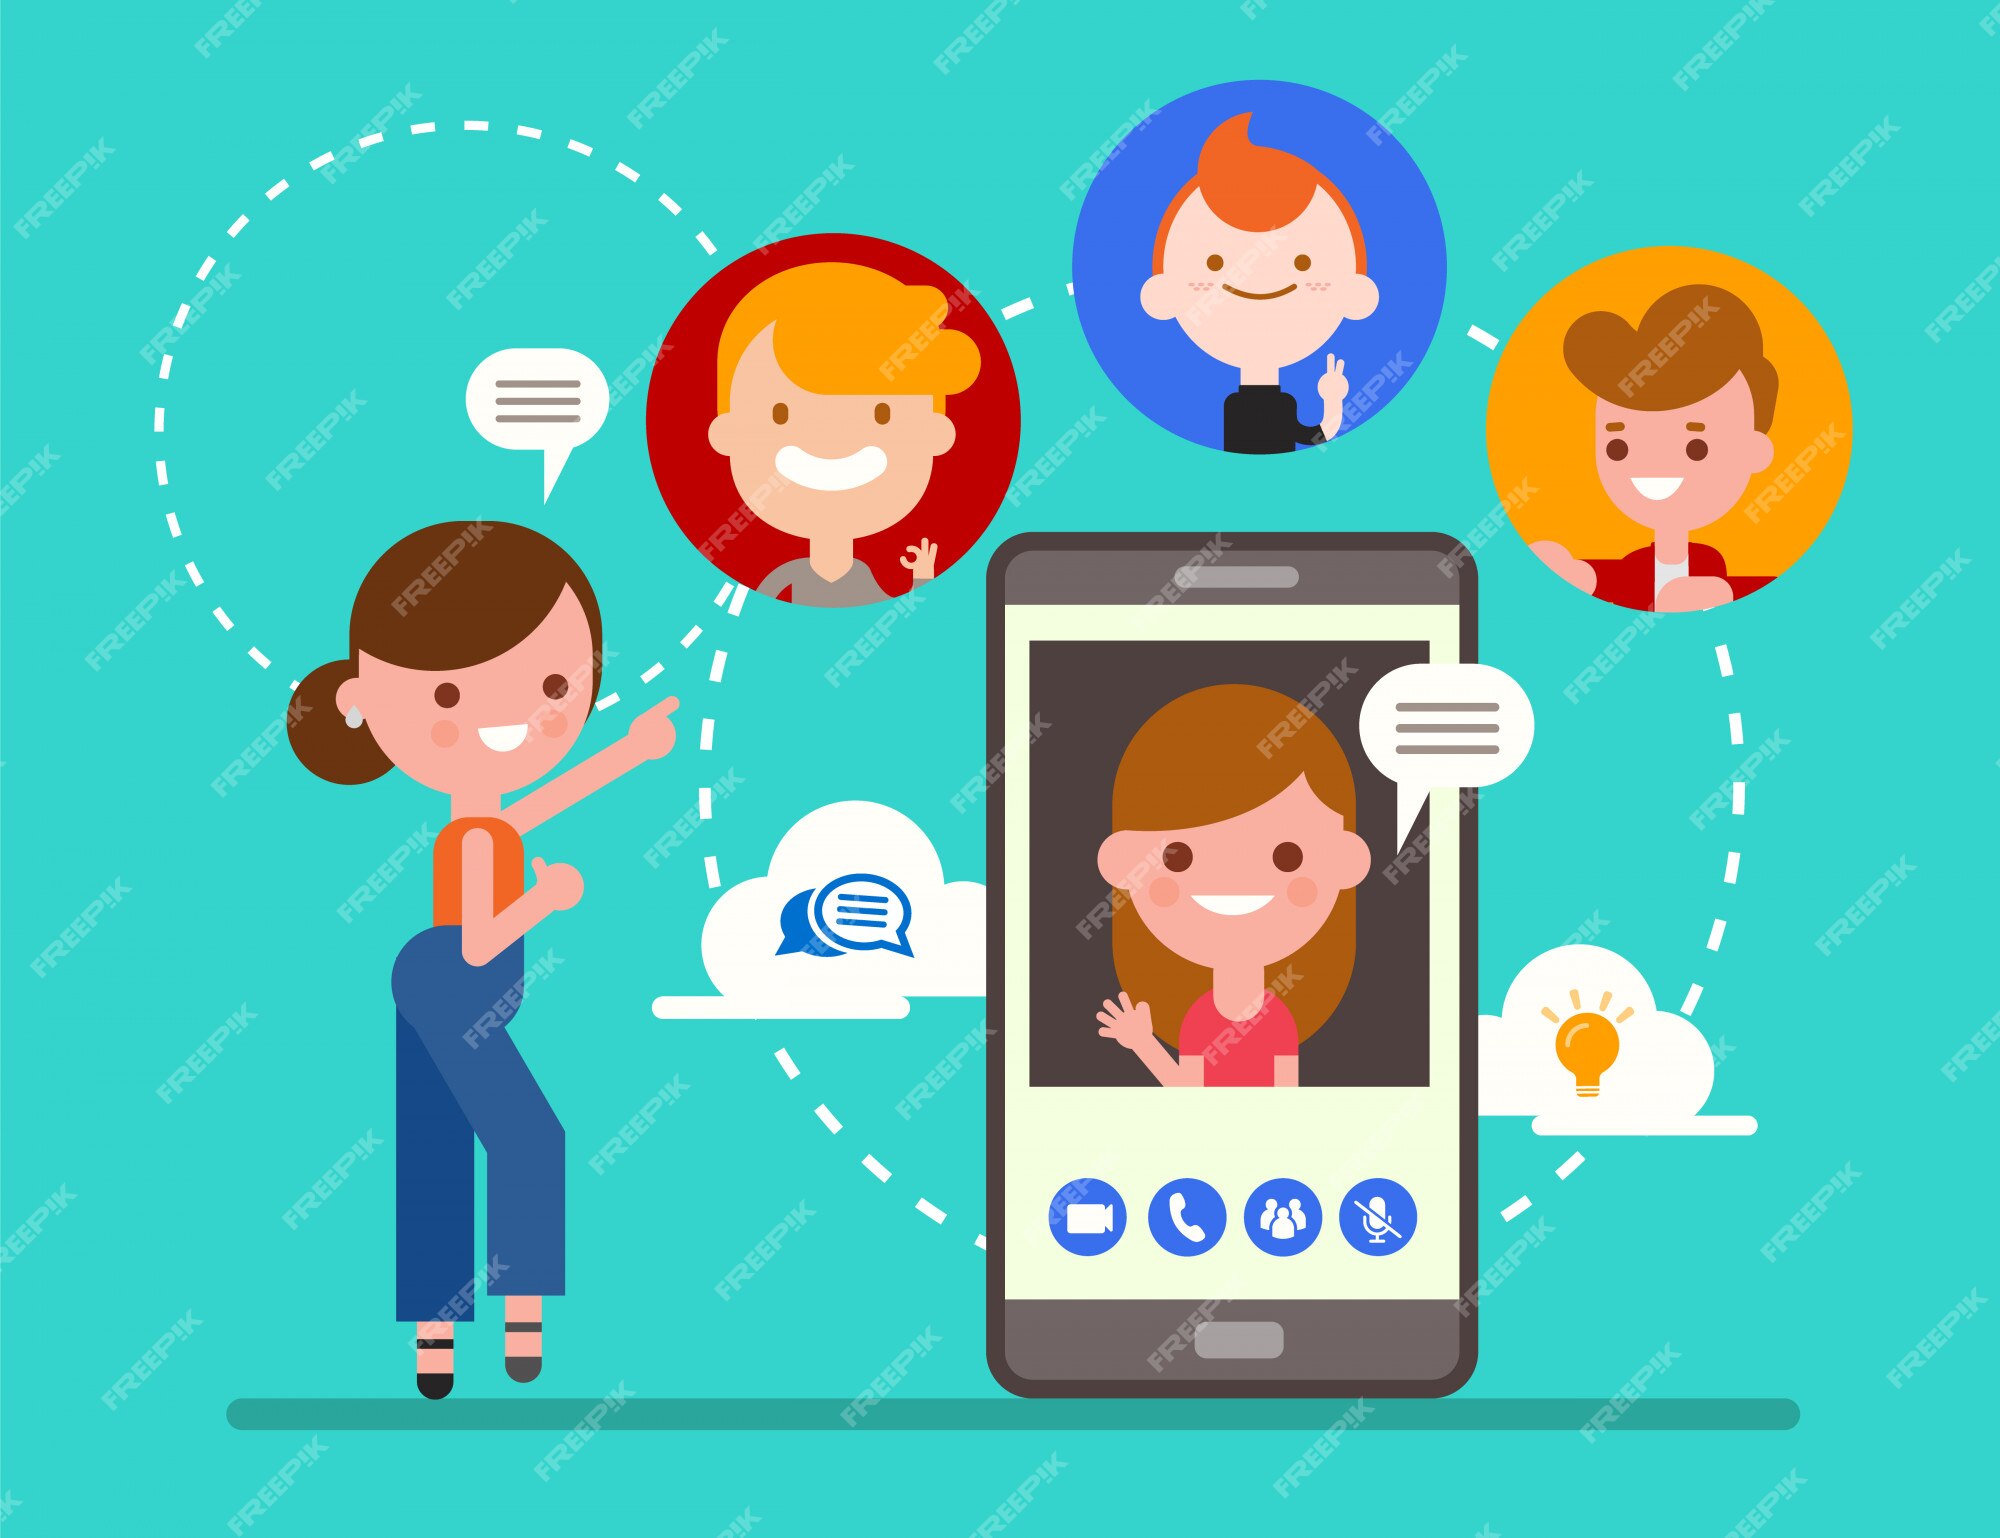 Premium Vector | Group of friends chatting online by video call app with  smartphone. social media technology concept illustration. flat design style  cartoon character.